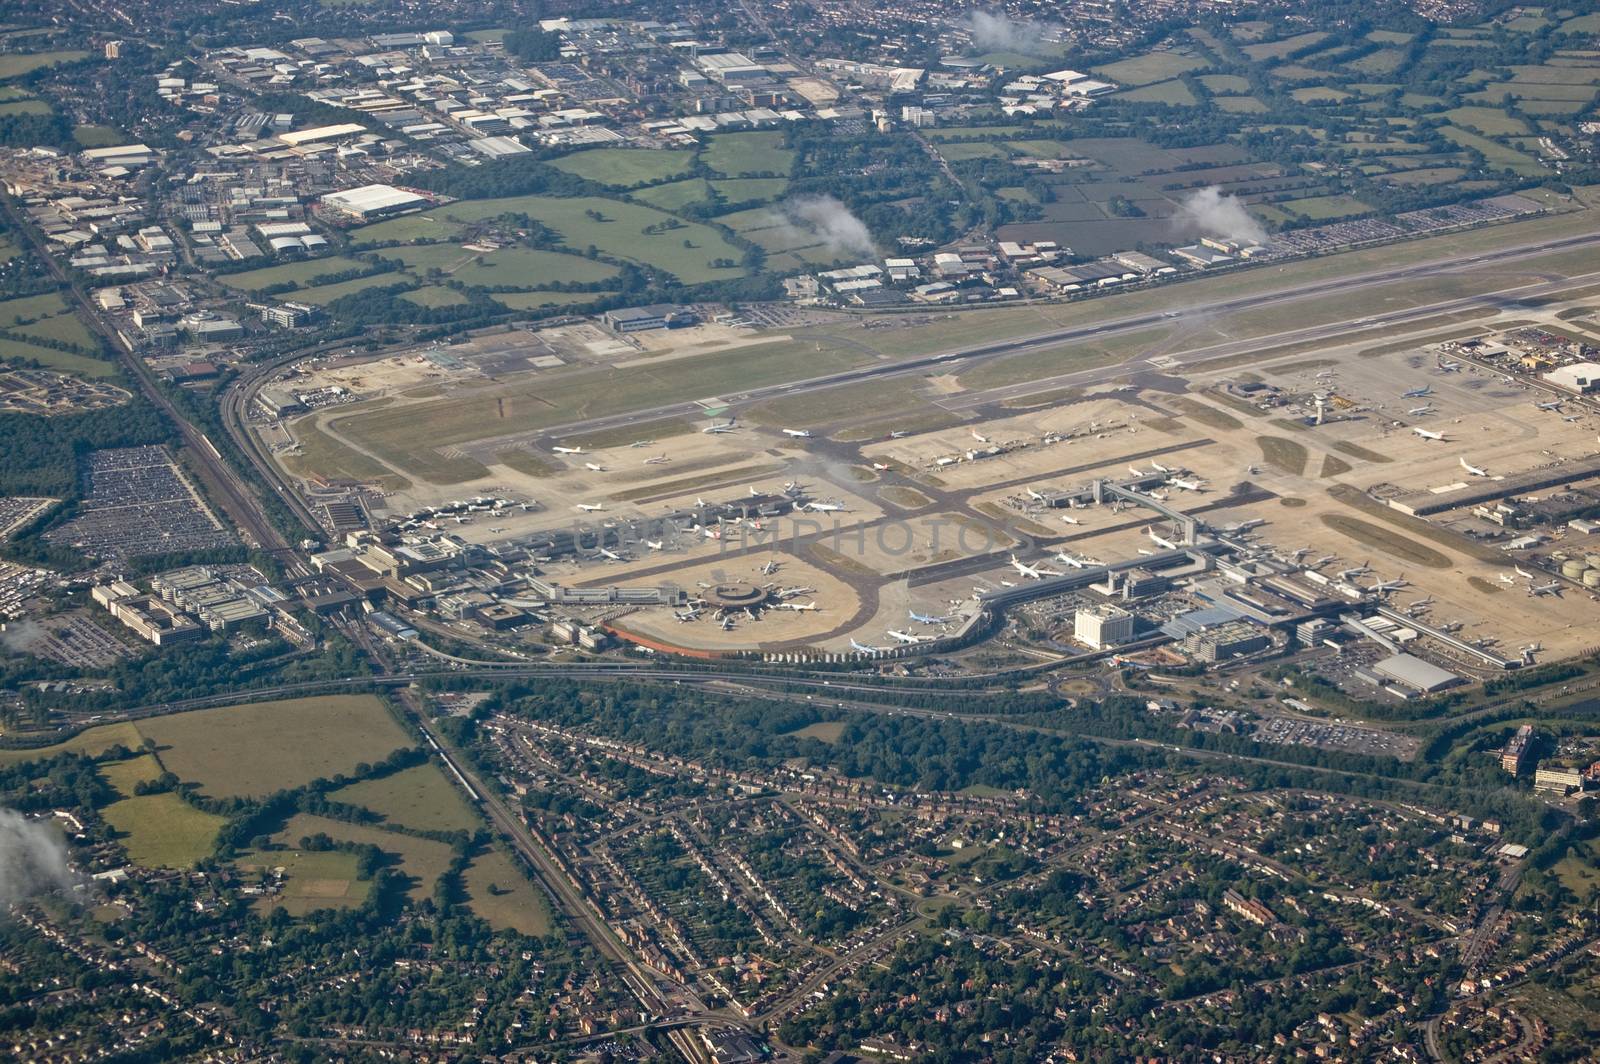 Gatwick Airport Aerial View by BasPhoto